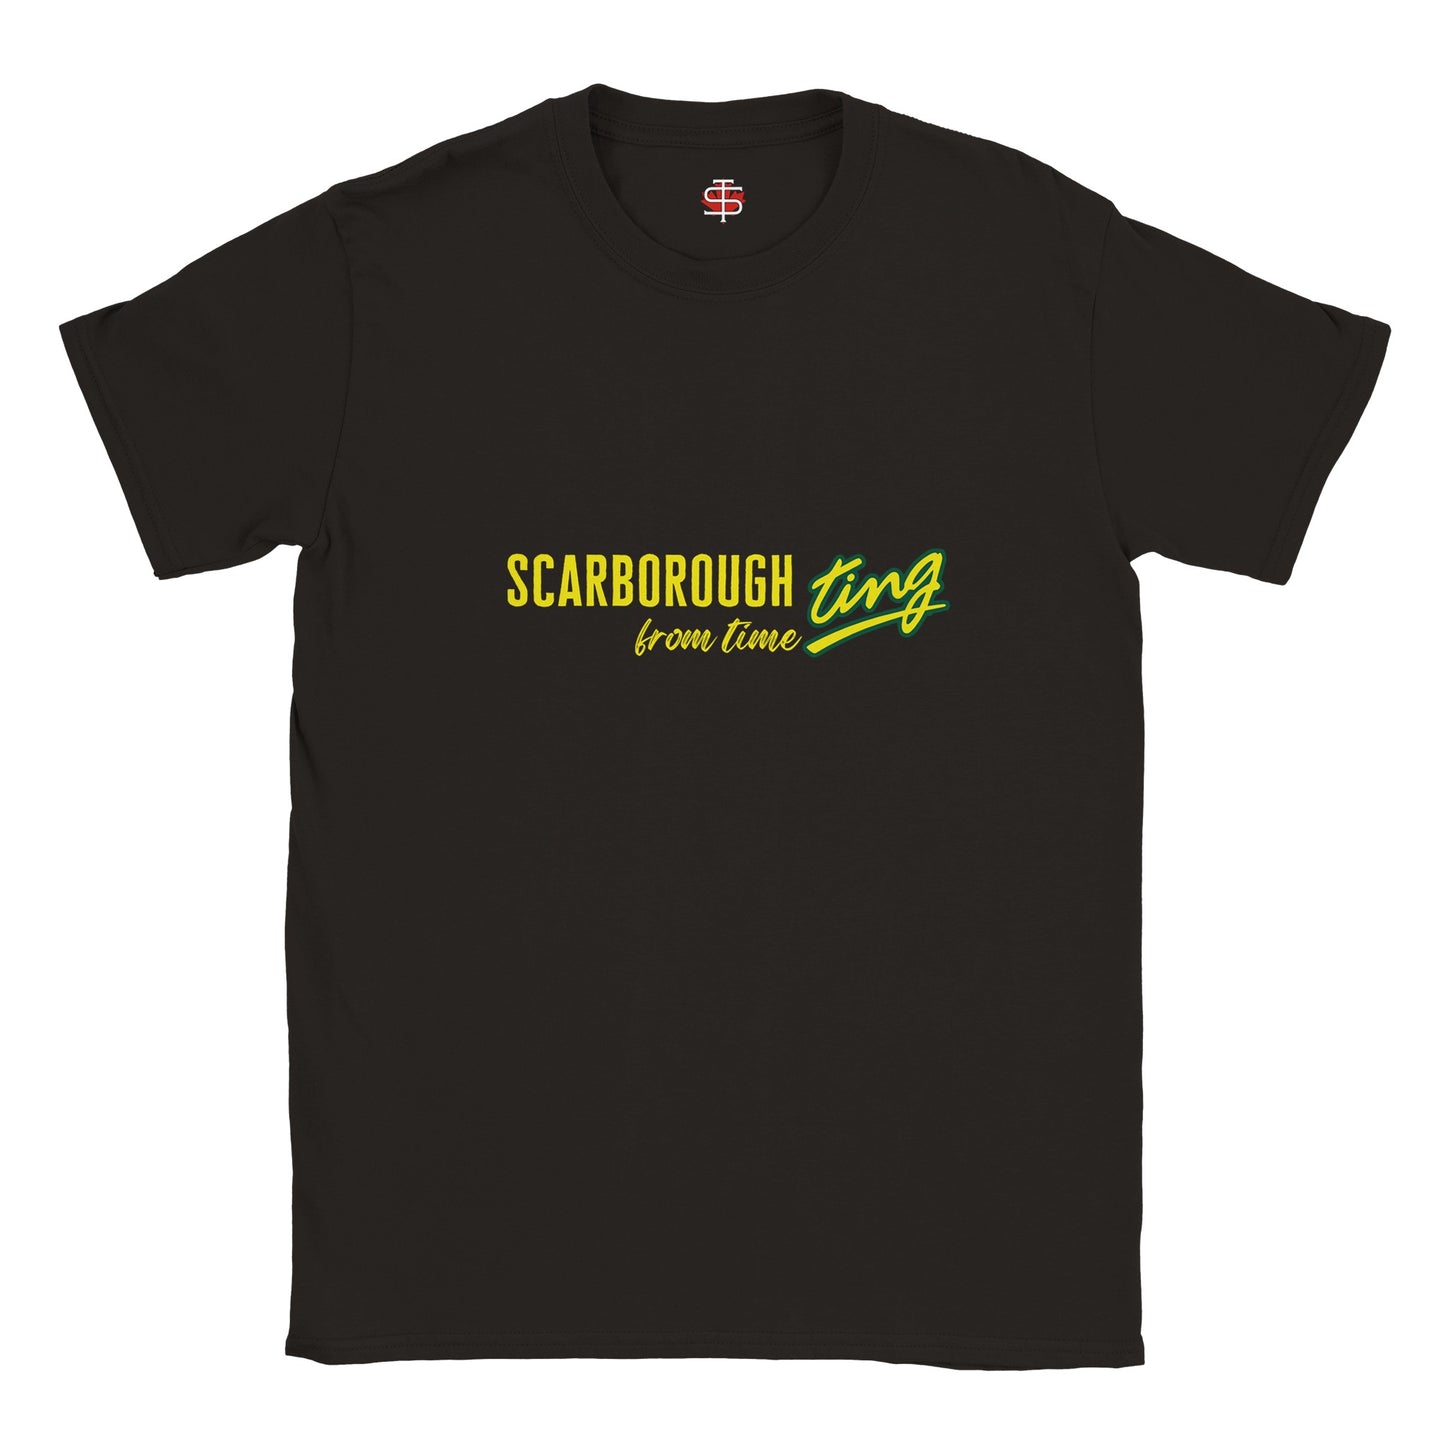 "Scarborough Ting from Time" Classic Unisex Crewneck T-shirt